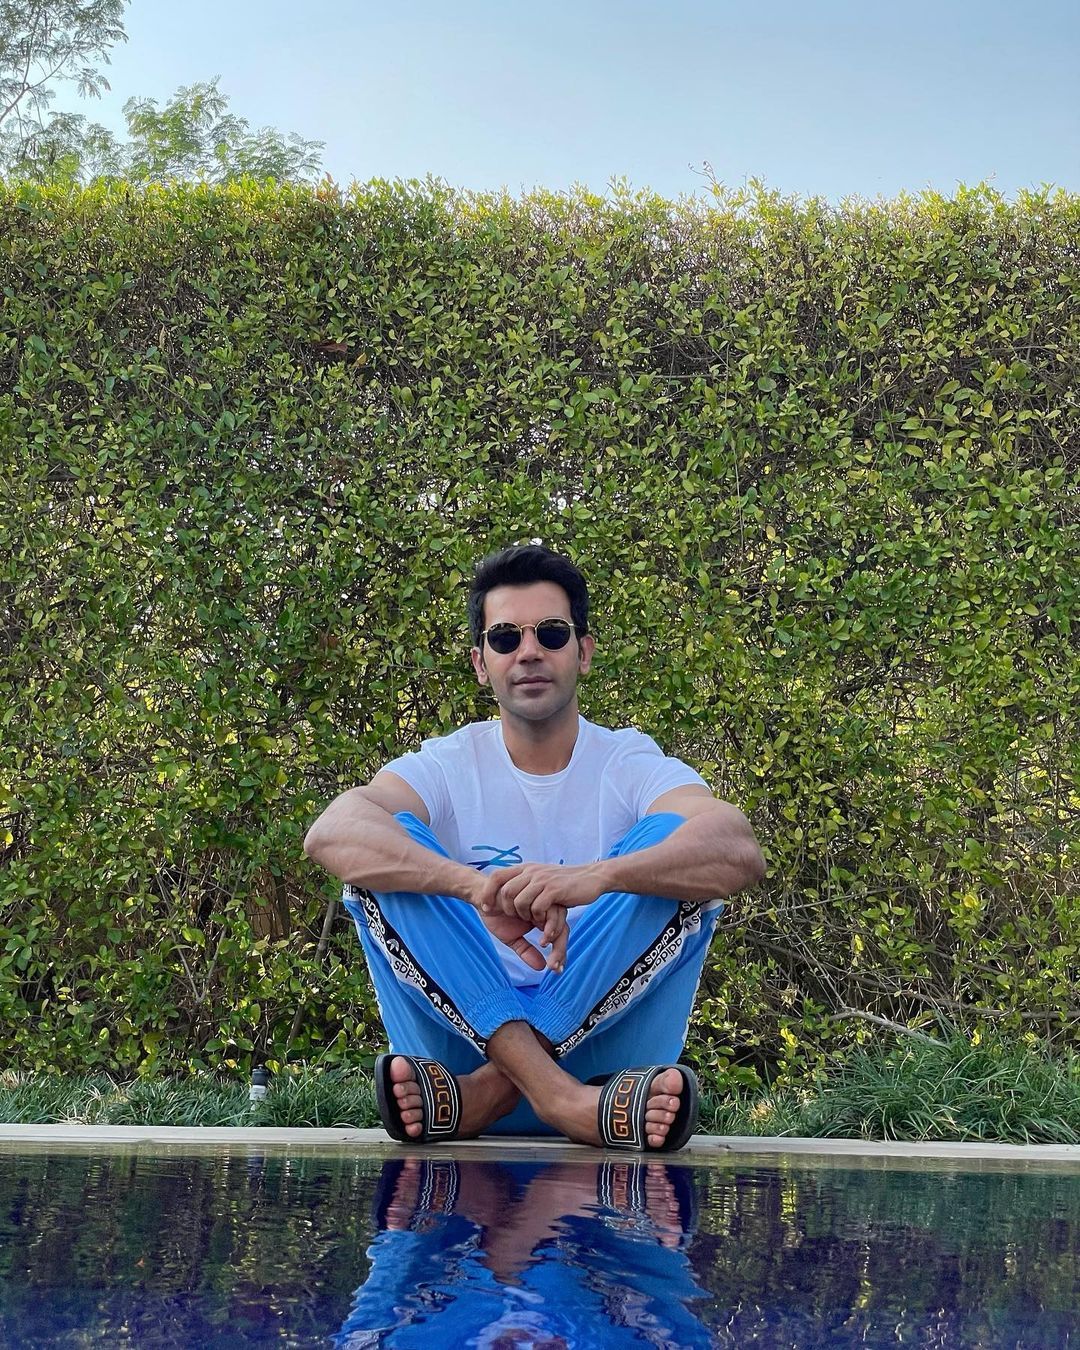 Rajkummar Rao Talks About Struggling Days As An Actor With No Money Even For Food, Says, "I Never Came With A Plan-B"